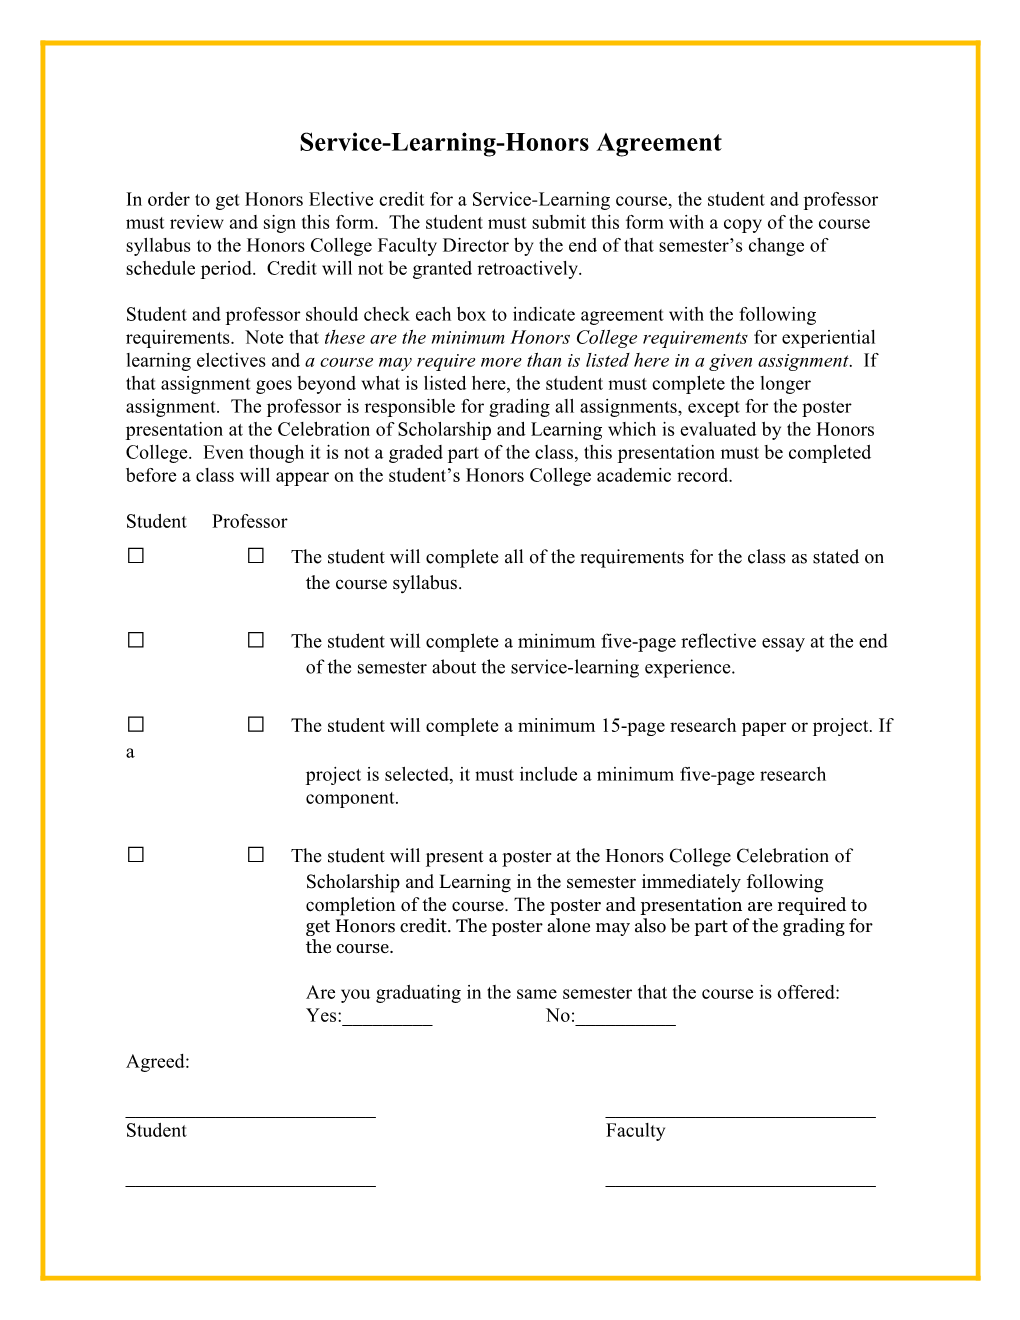 Service-Learning-Honors Agreement